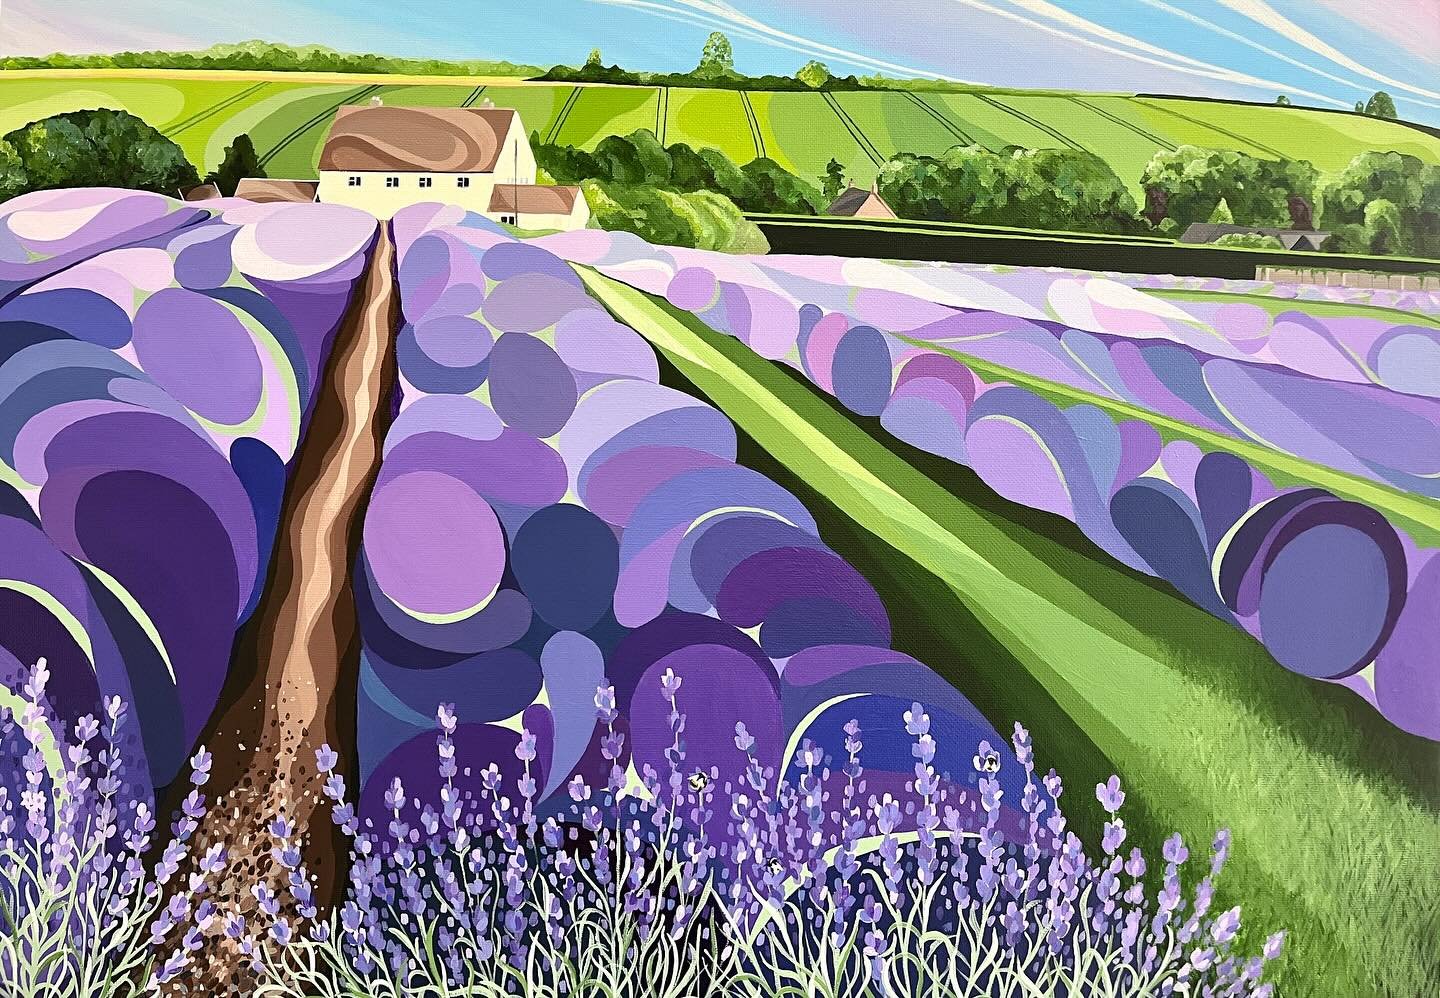 New painting, the lavender fields at @cotswoldlavender It&rsquo;s been wonderful creating so many shades of purple 💜 

#purple #lavender #cotswolds #cotswoldlavender #visitengland #lavenderfields #bees